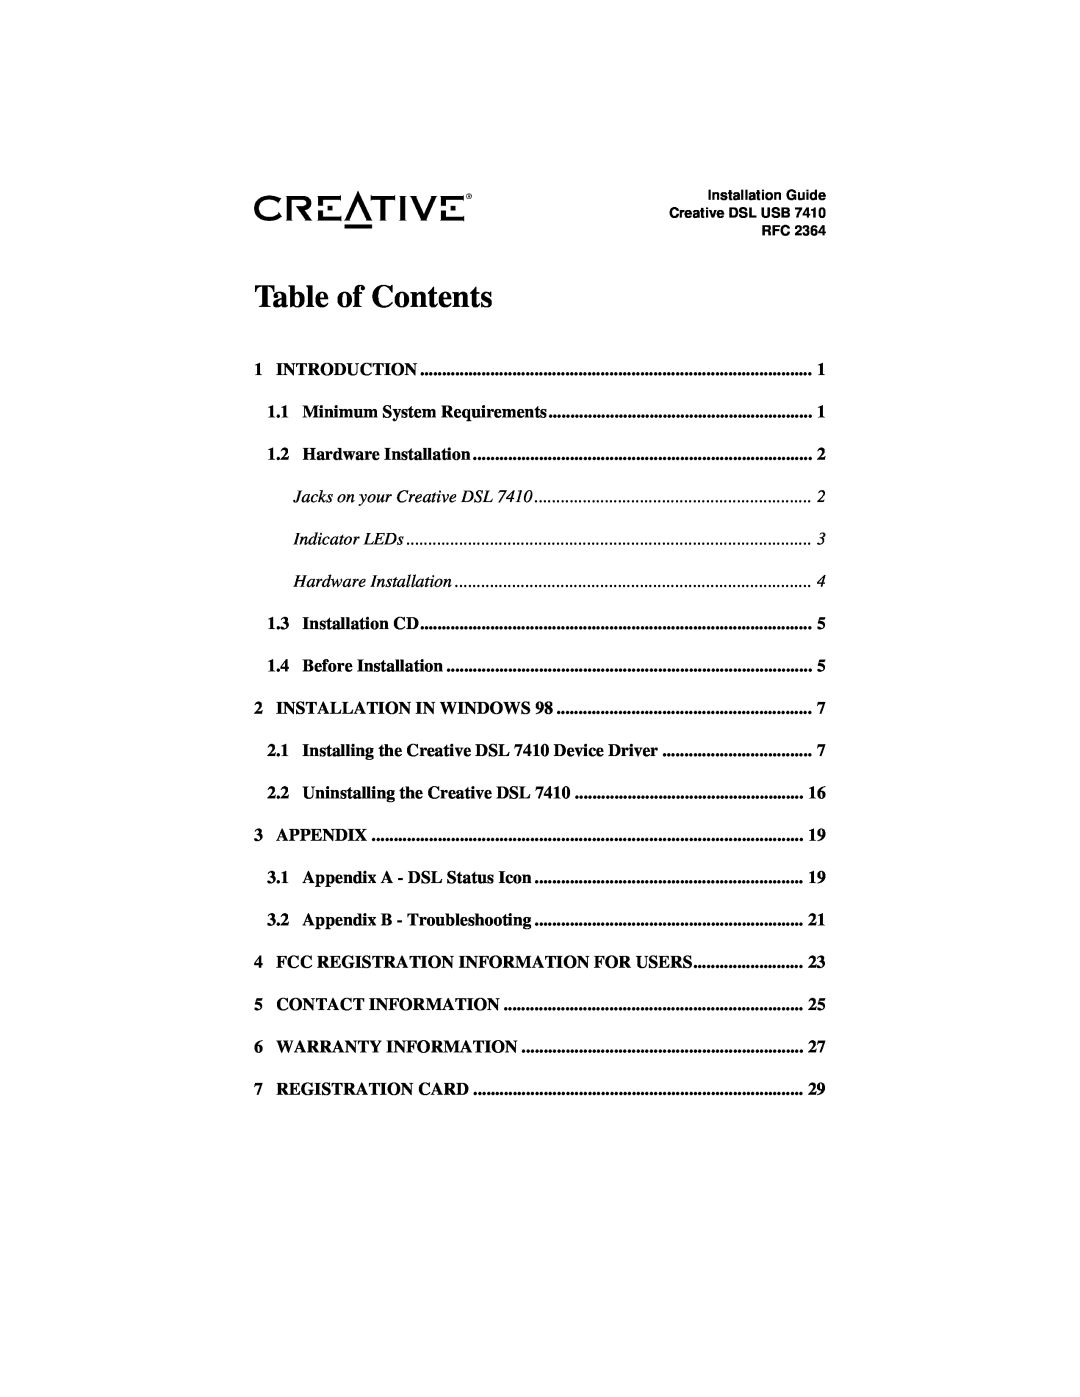 Creative RFC 2364 appendix Table of Contents, Jacks on your Creative DSL, Indicator LEDs, Hardware Installation 